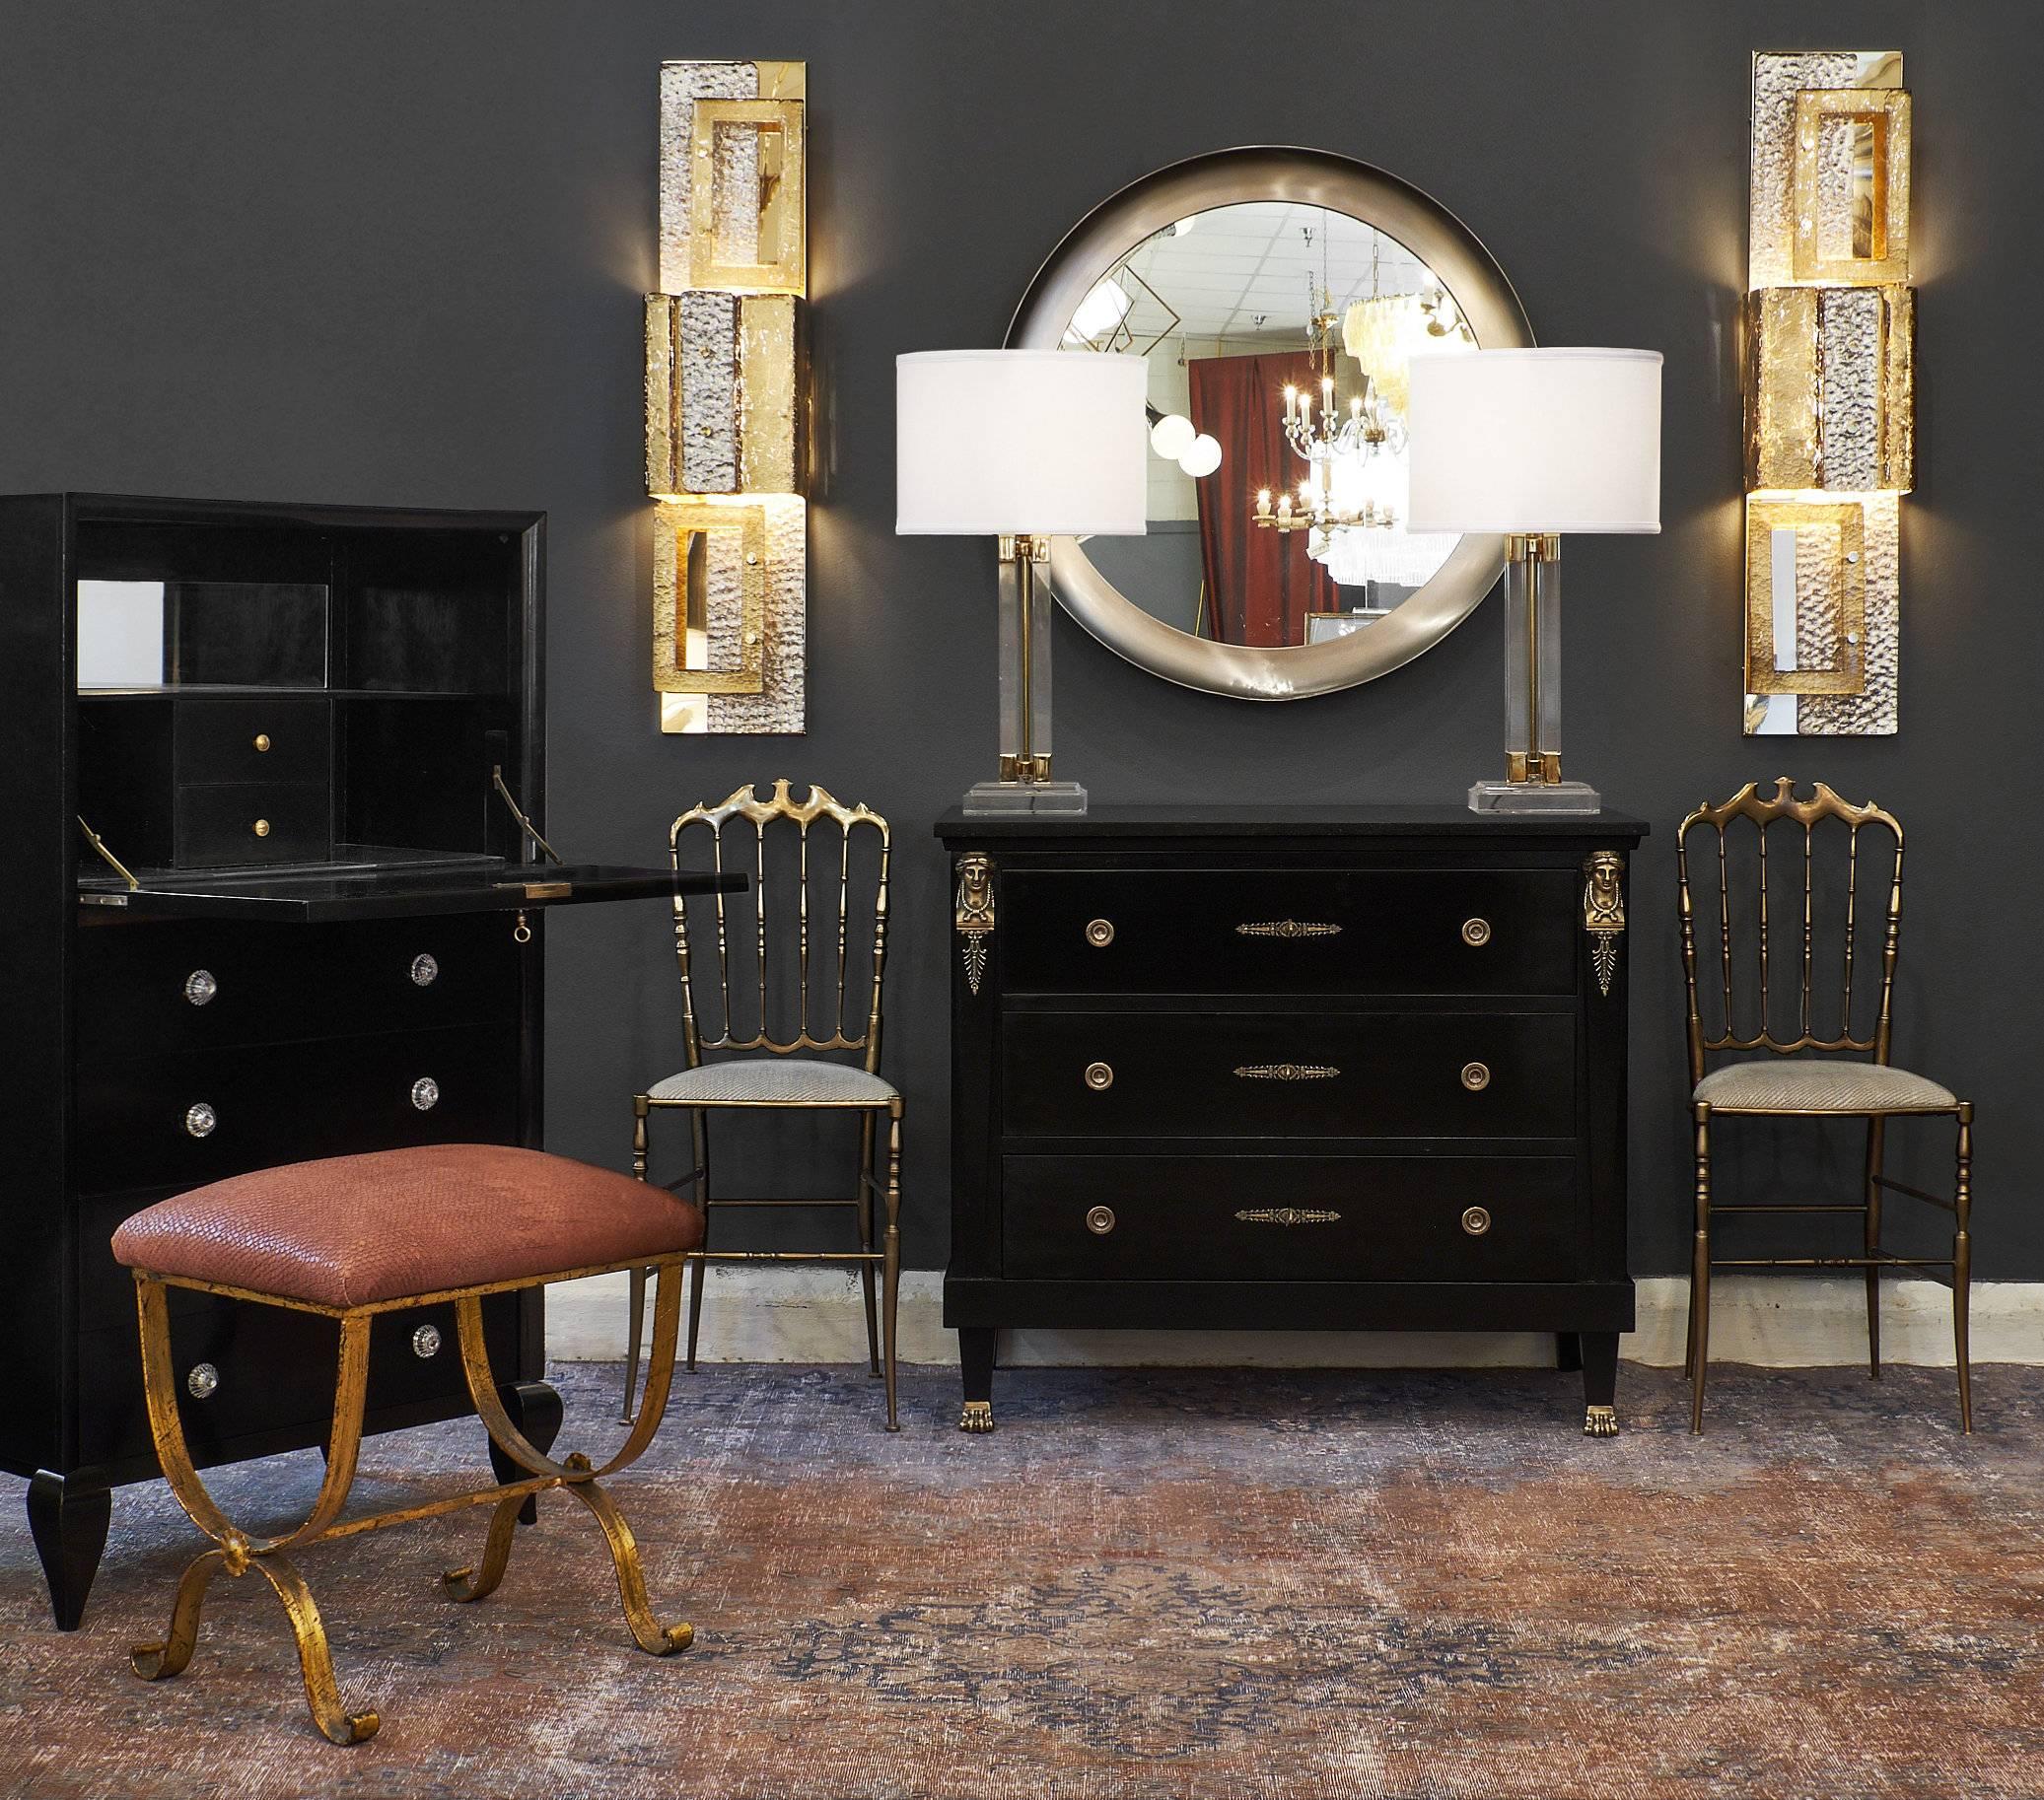 A charming Empire style chest with black marble top. This French antique piece is made of mahogany and features an intact marble slab, three dovetailed drawers, bronze hardware, and tapered columns with finely cast “cariatides a la Grecque” and